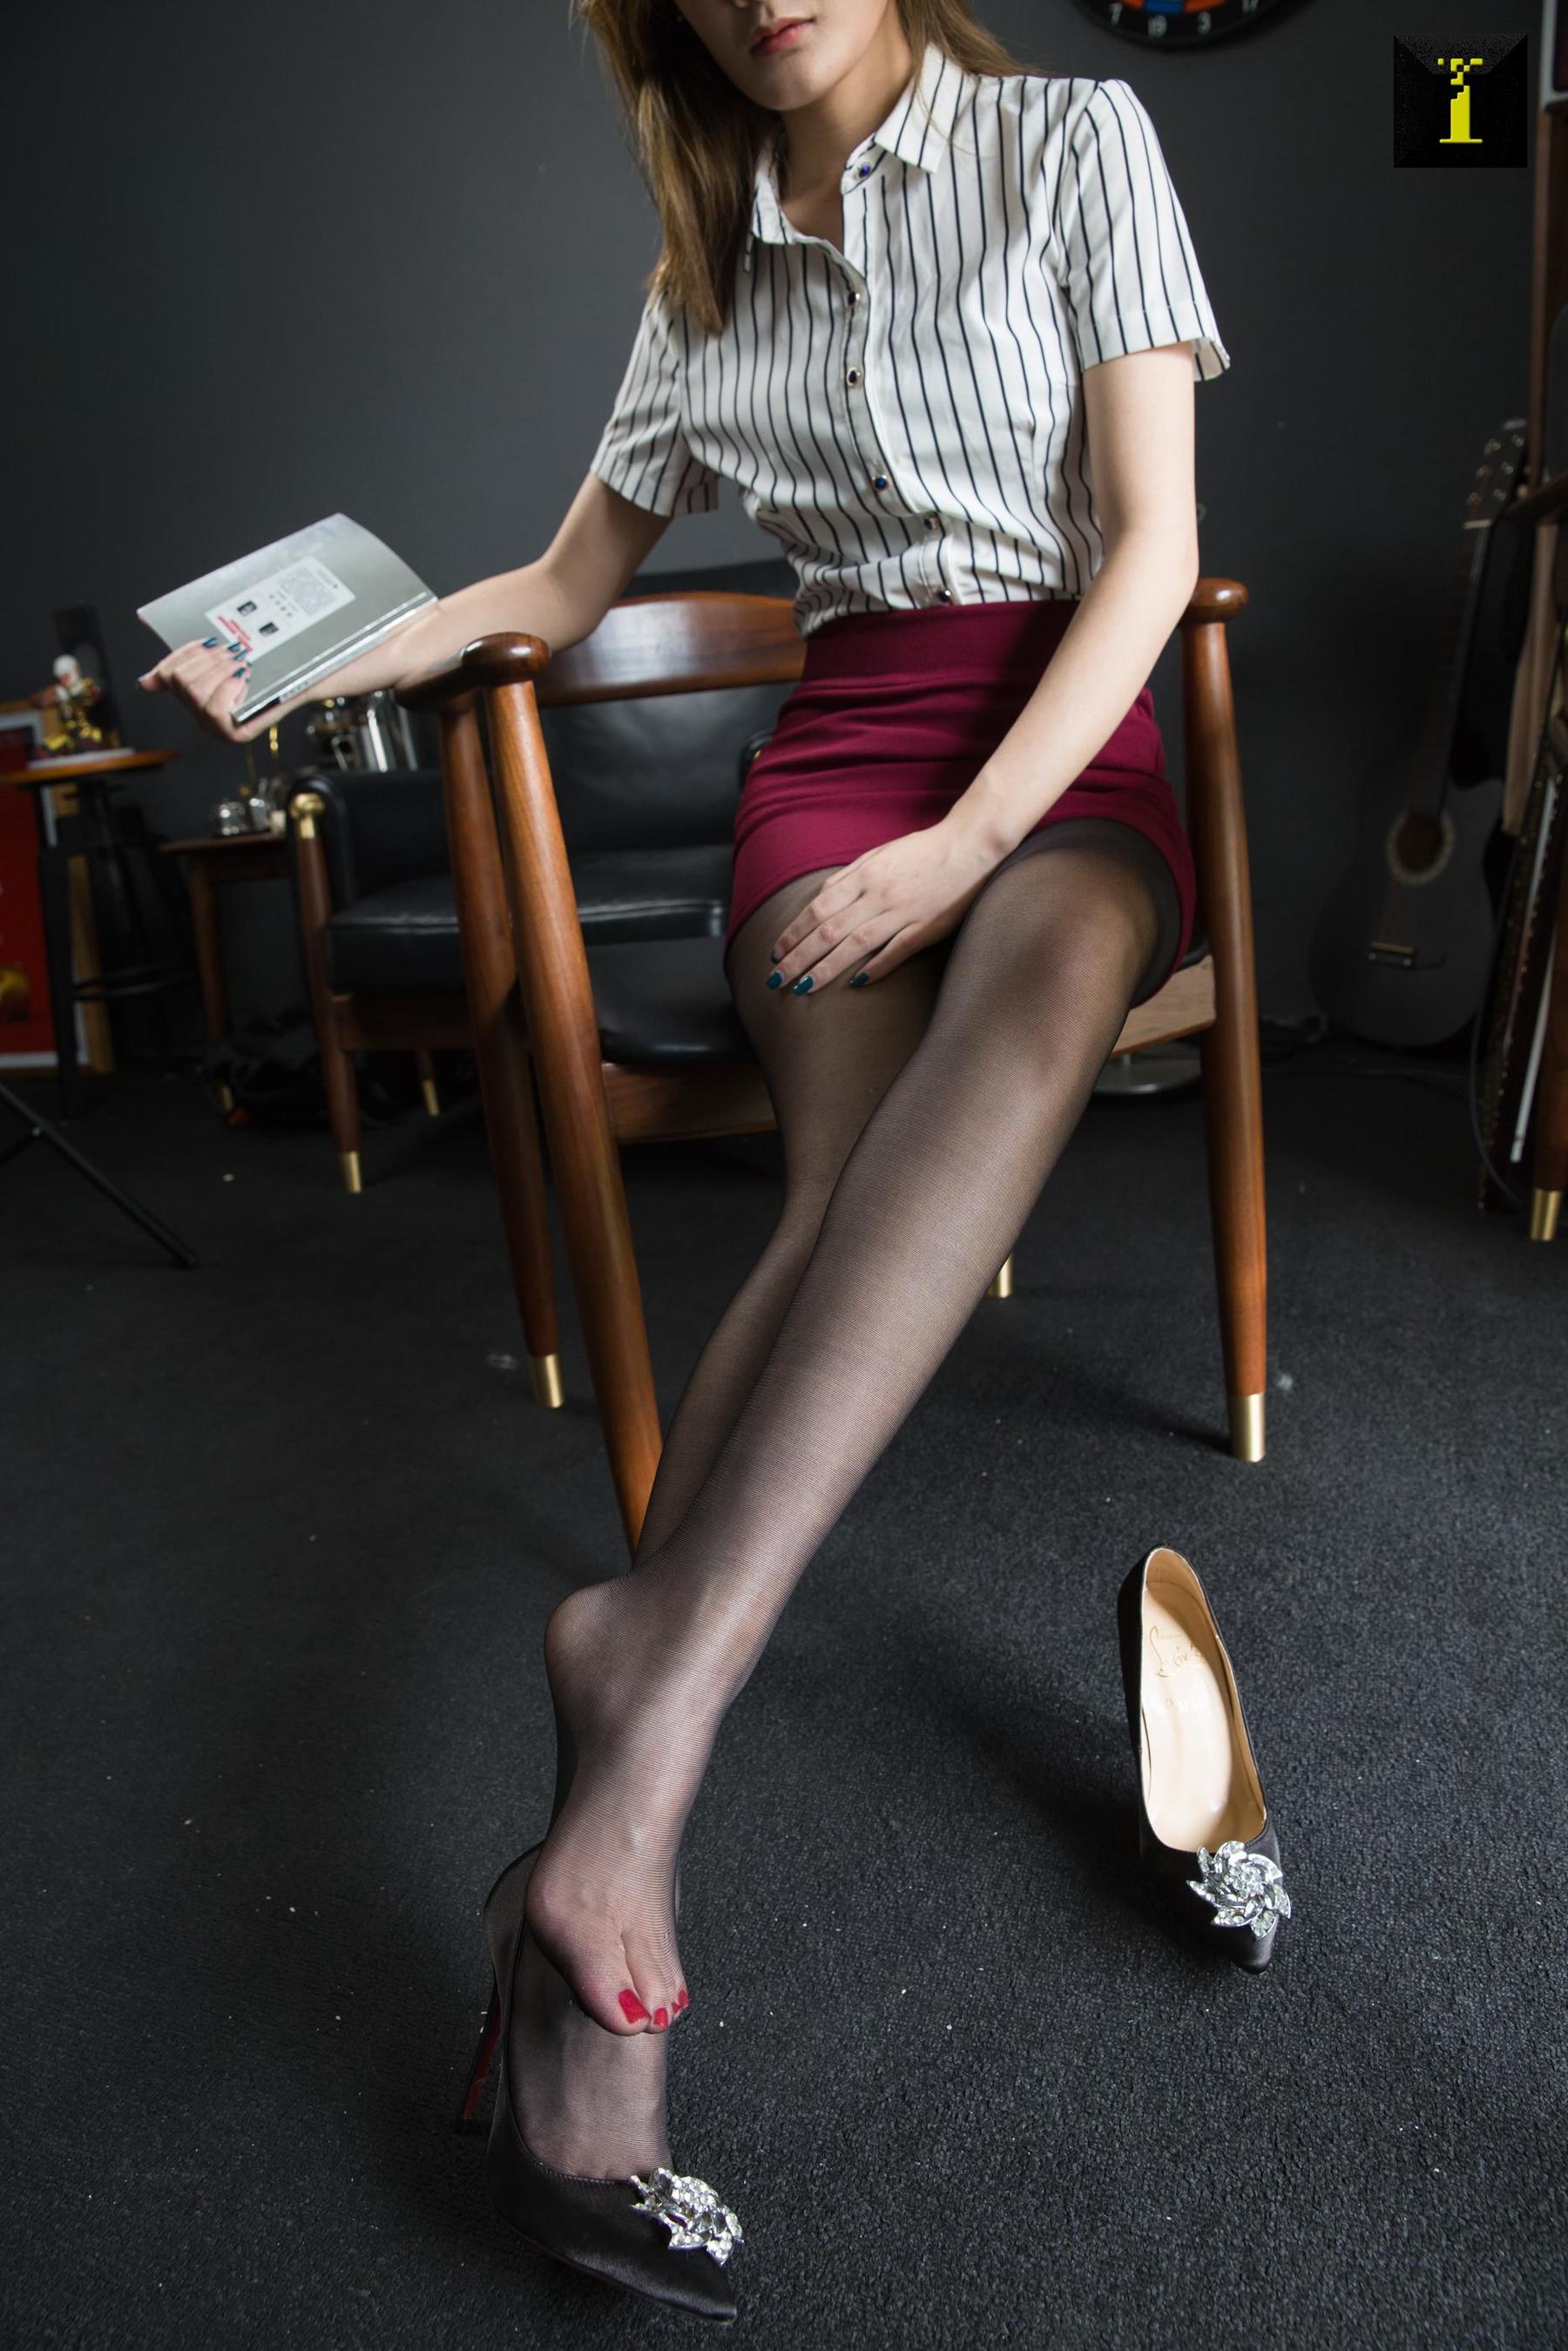 Ziwei "Life is like a play, it depends on acting" [Iss to IESS] Beautiful legs in stockings Page 53 No.01bb72